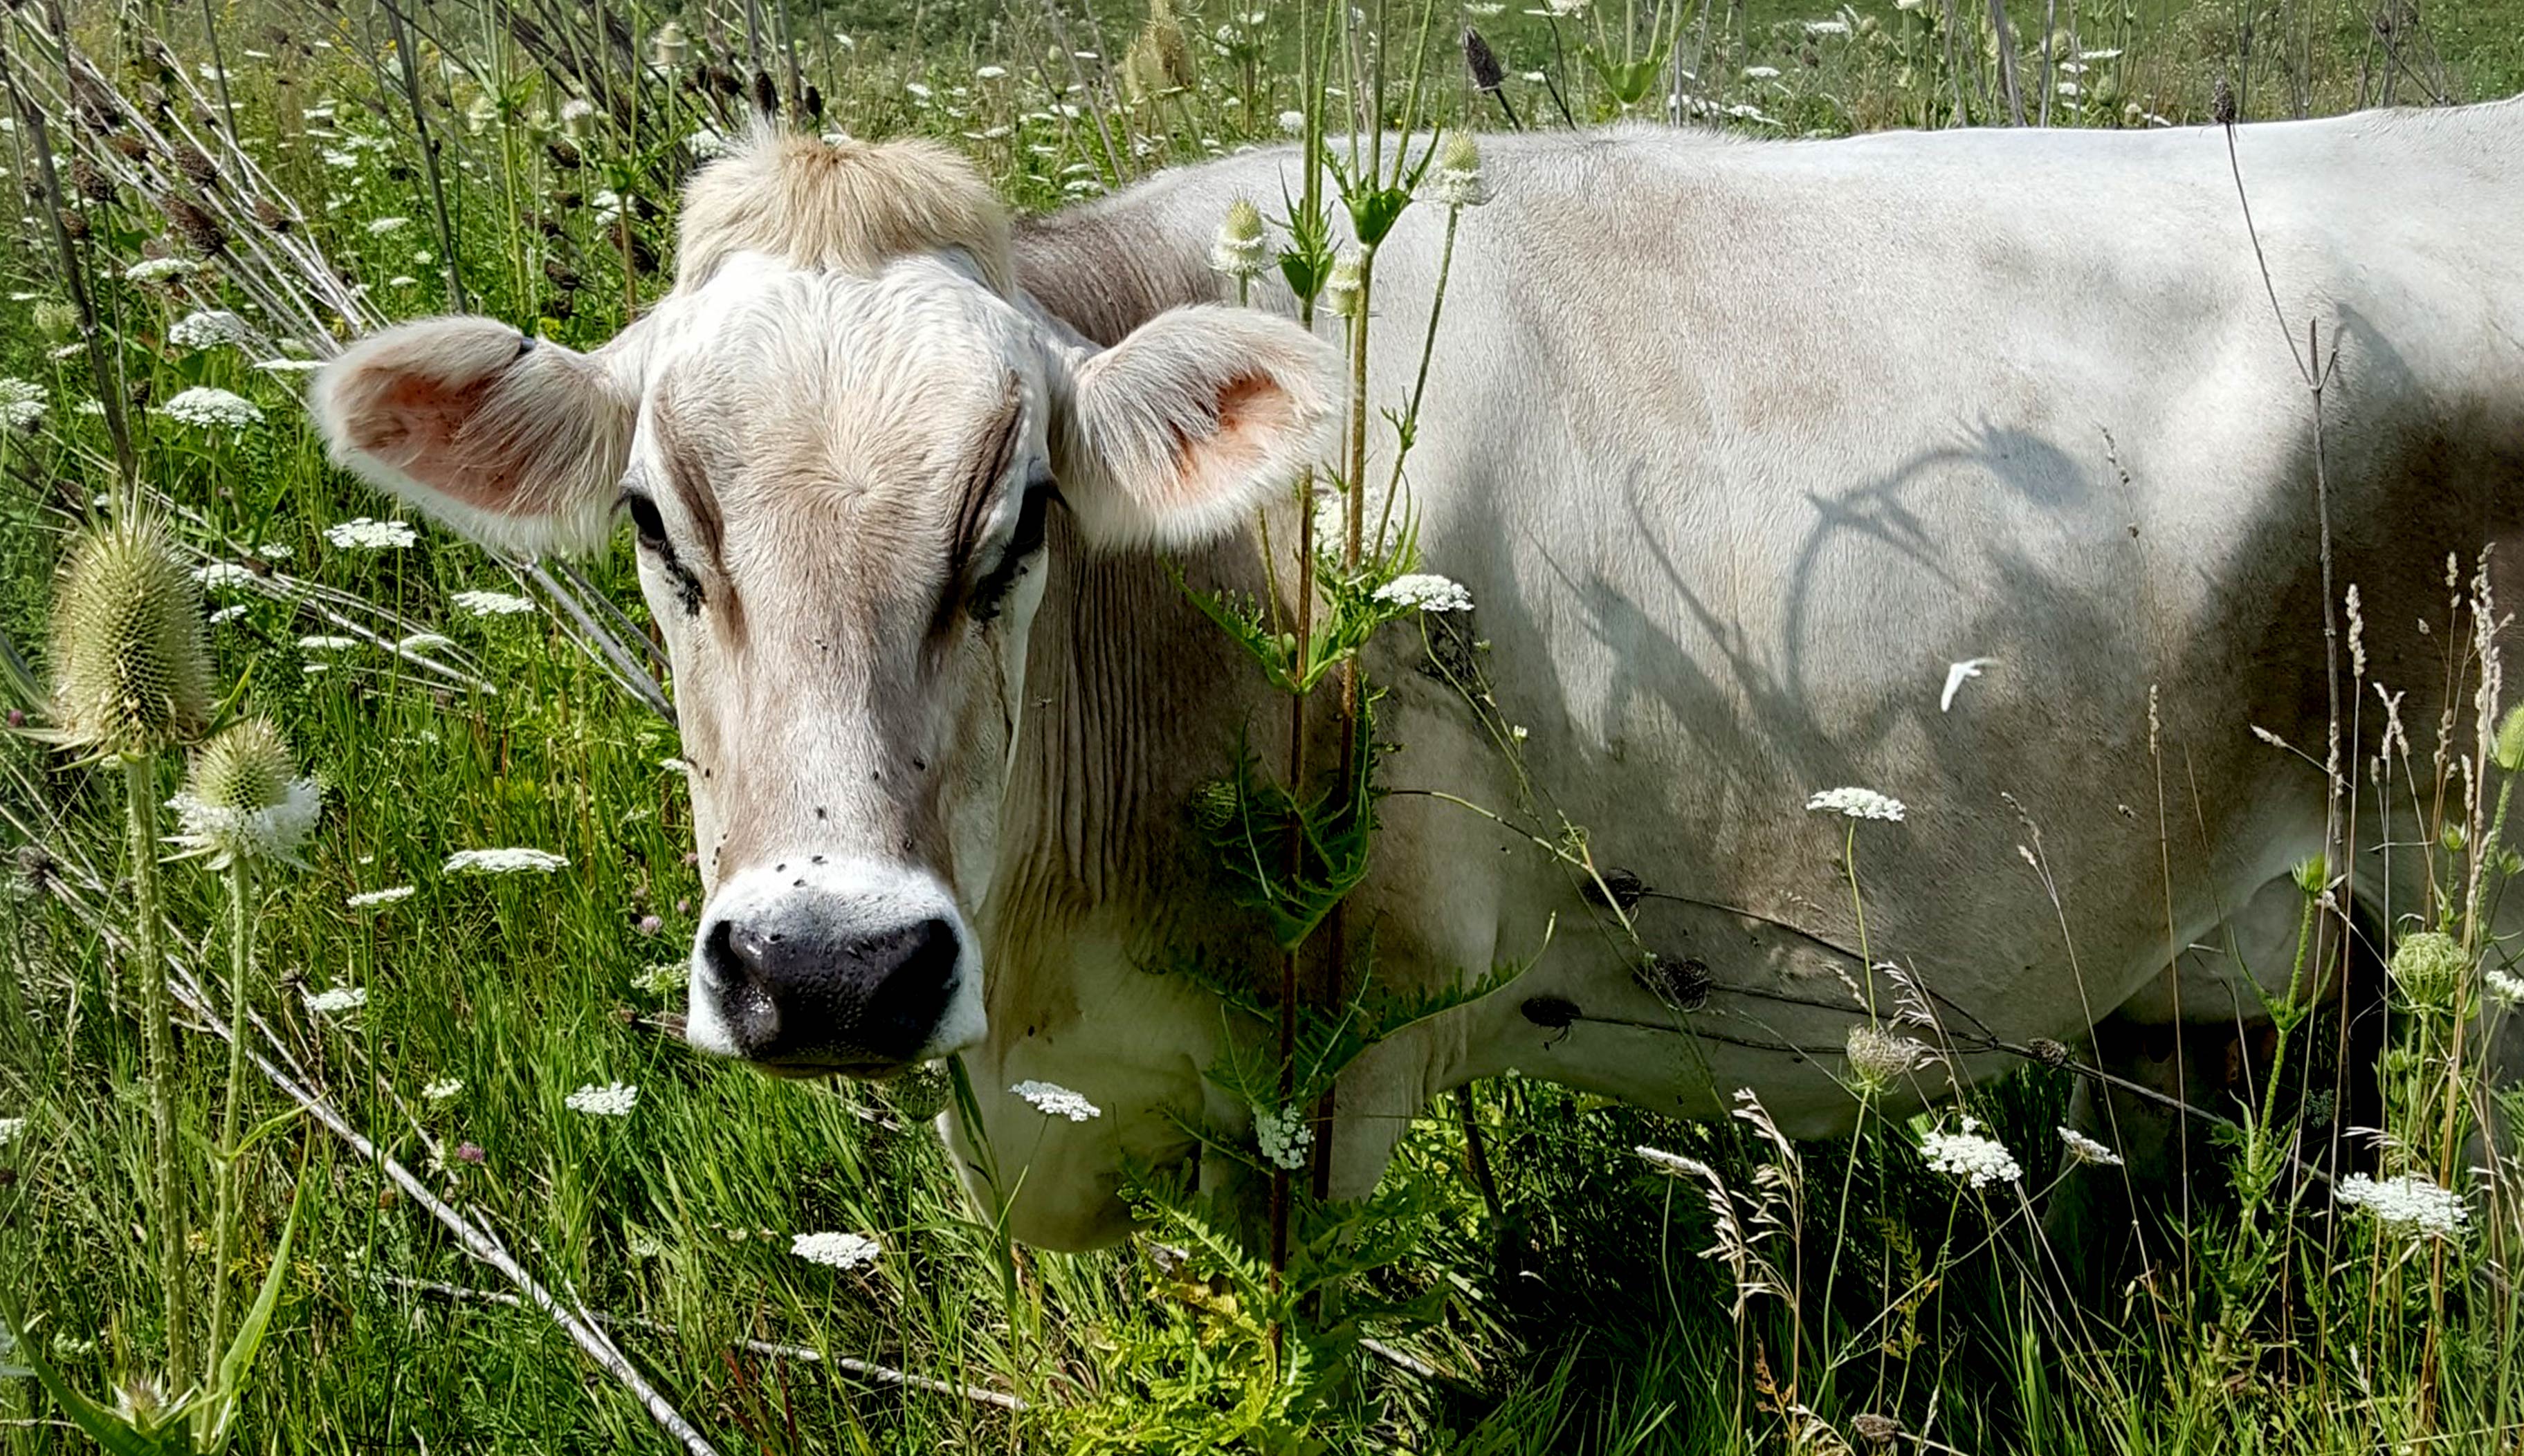 Cow standing in field surrounded by teasel plants.